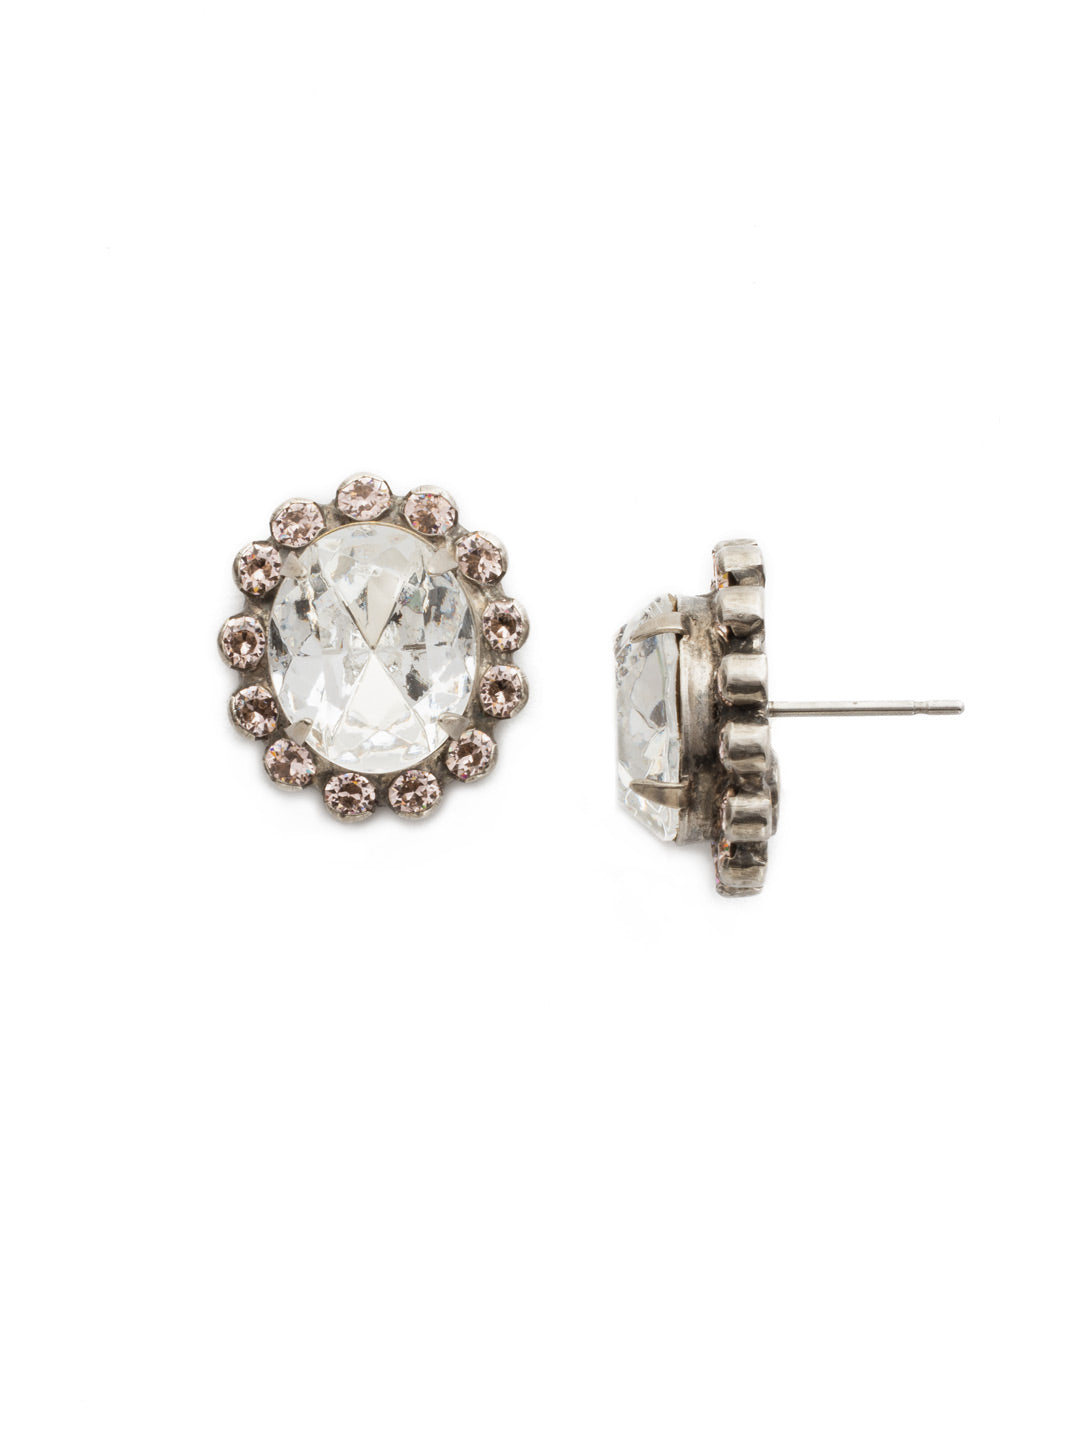 Graycen Round Stud Earring - ECY5ASSNB - <p>The Graycen Round Stud Earrings feature a round halo cut crystal on a post. From Sorrelli's Snow Bunny collection in our Antique Silver-tone finish.</p>